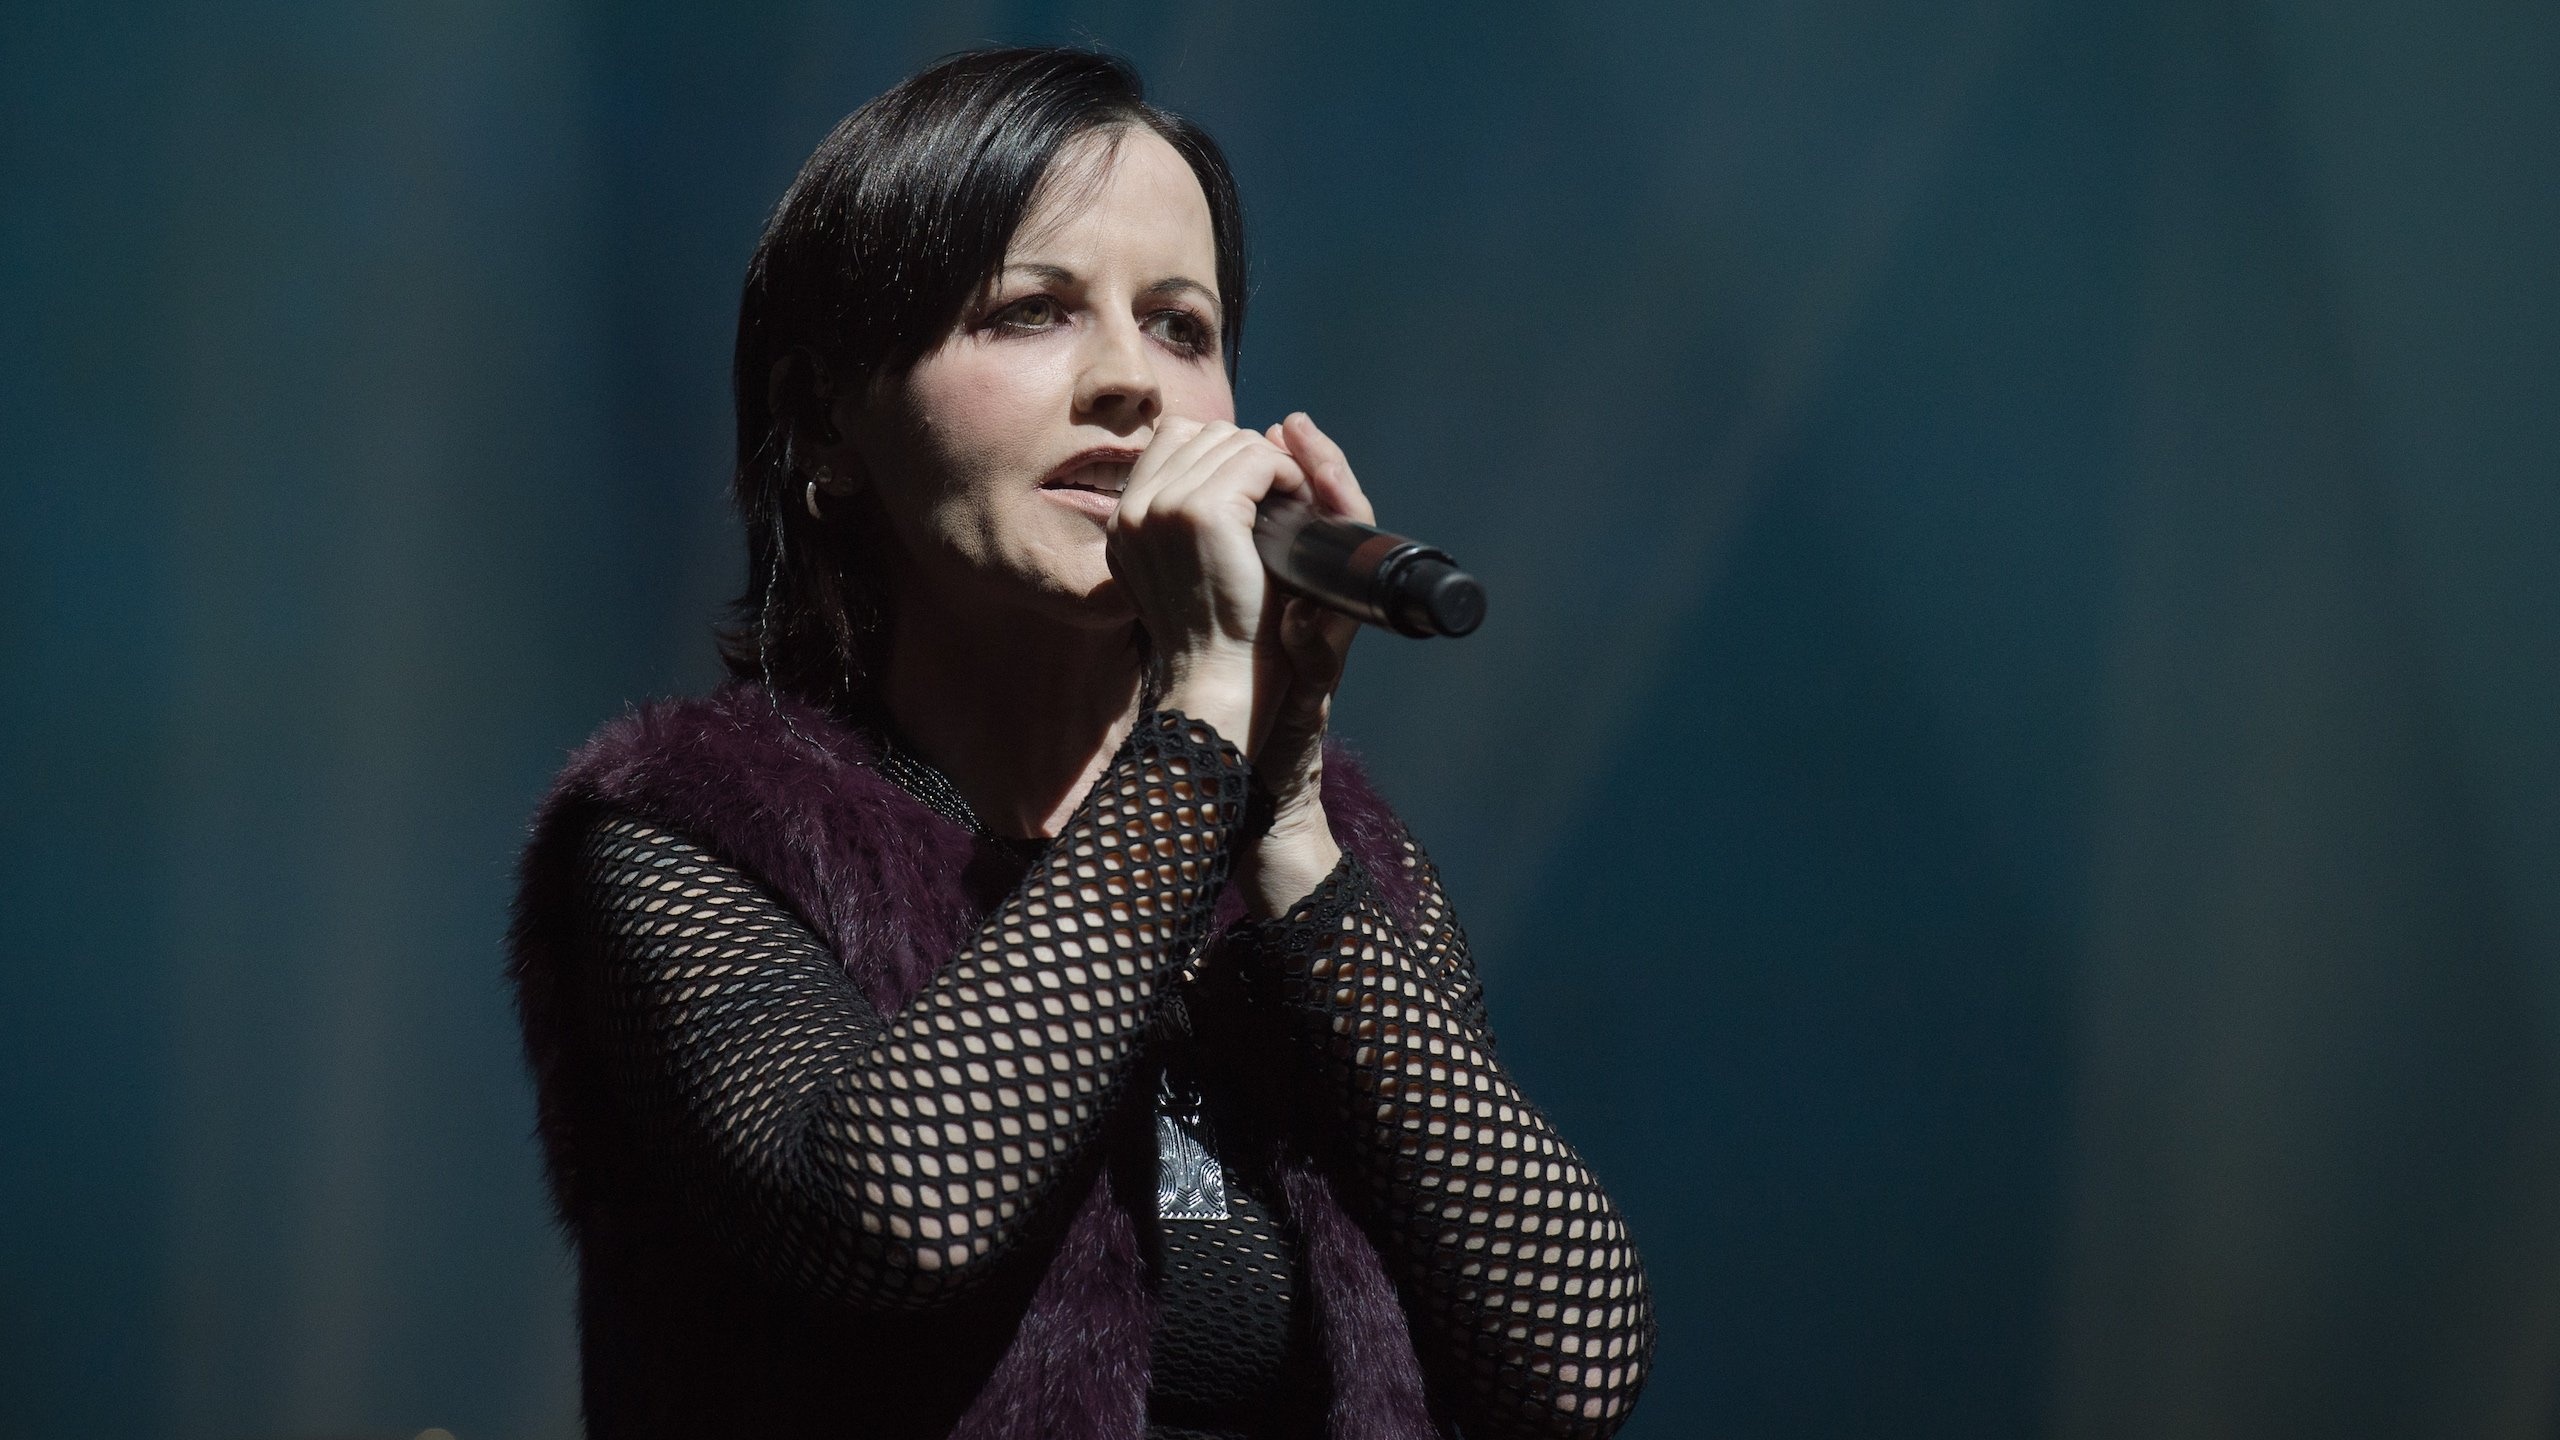 Tributes flow for The Cranberries, Dolores O'Riordan, Music Feeds, 2560x1440 HD Desktop